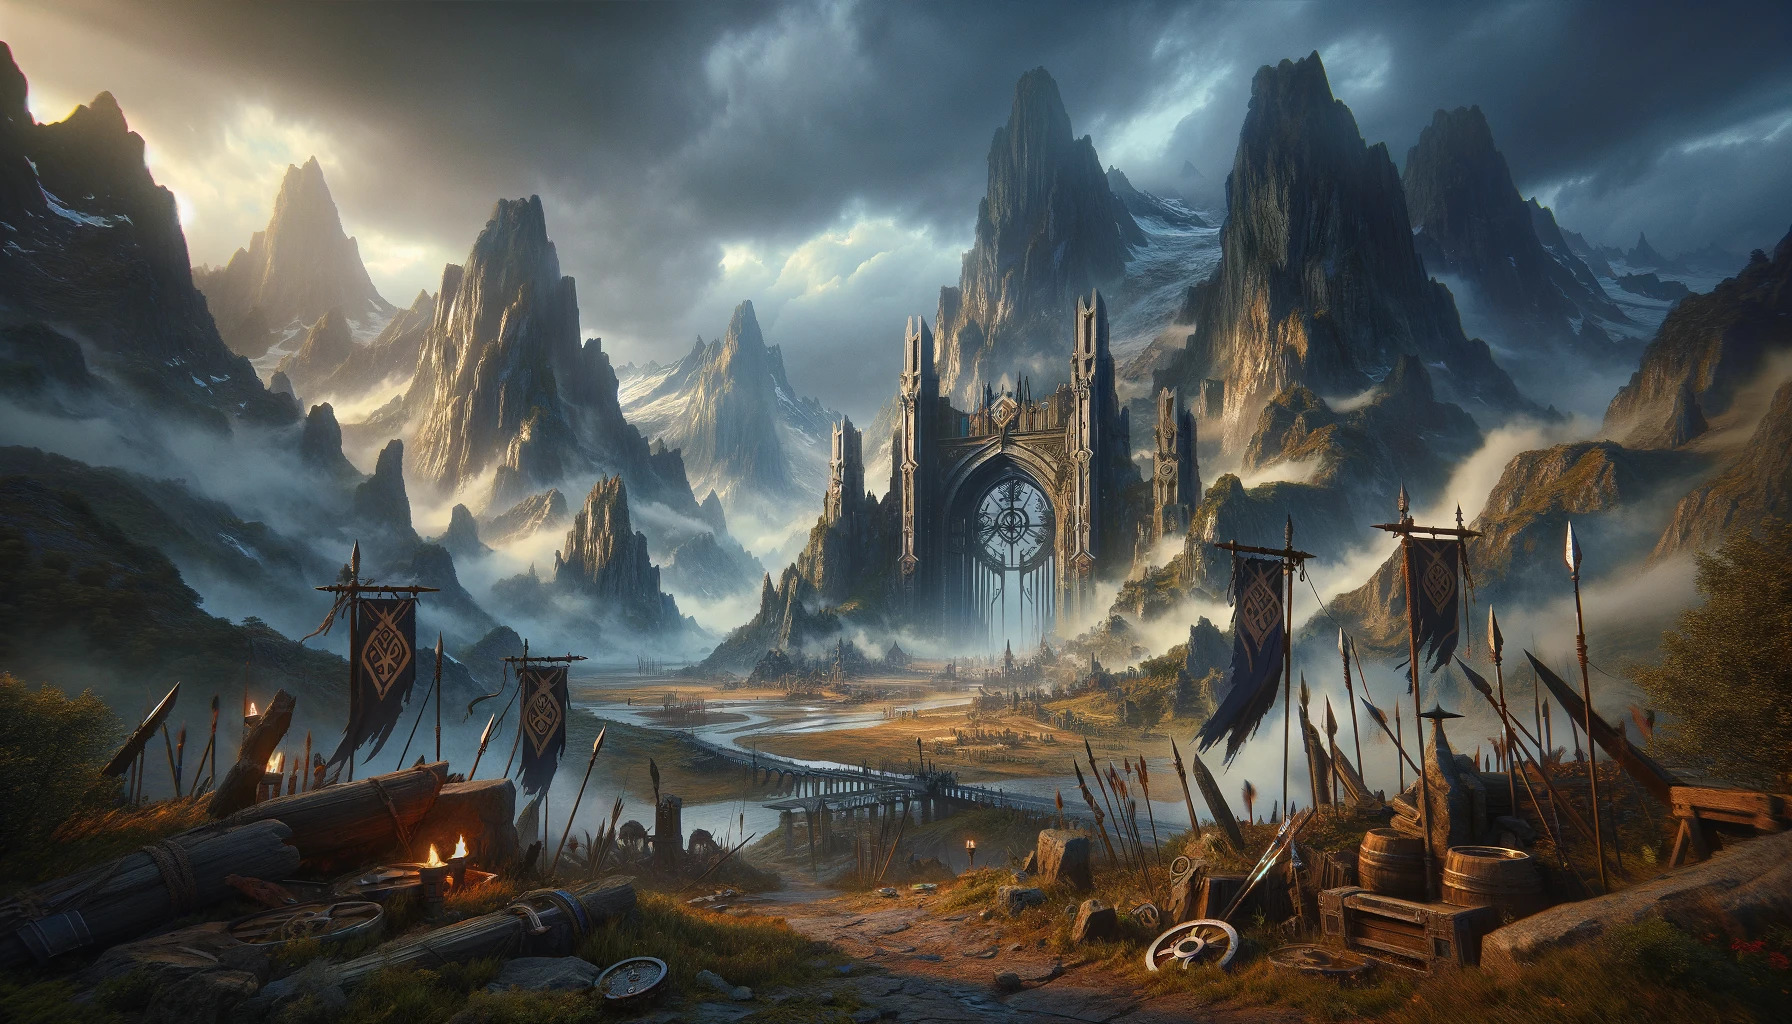 a cinematic image inspired by the themes often found in Orcish lore. It captures the essence of a mythical world with towering mountains, ancient ruins, and a landscape that speaks of epic tales and adventures. This atmospheric setting is devoid of any letters, numbers, or explicit names, inviting you to immerse yourself into its story. (Orc Name Generator)